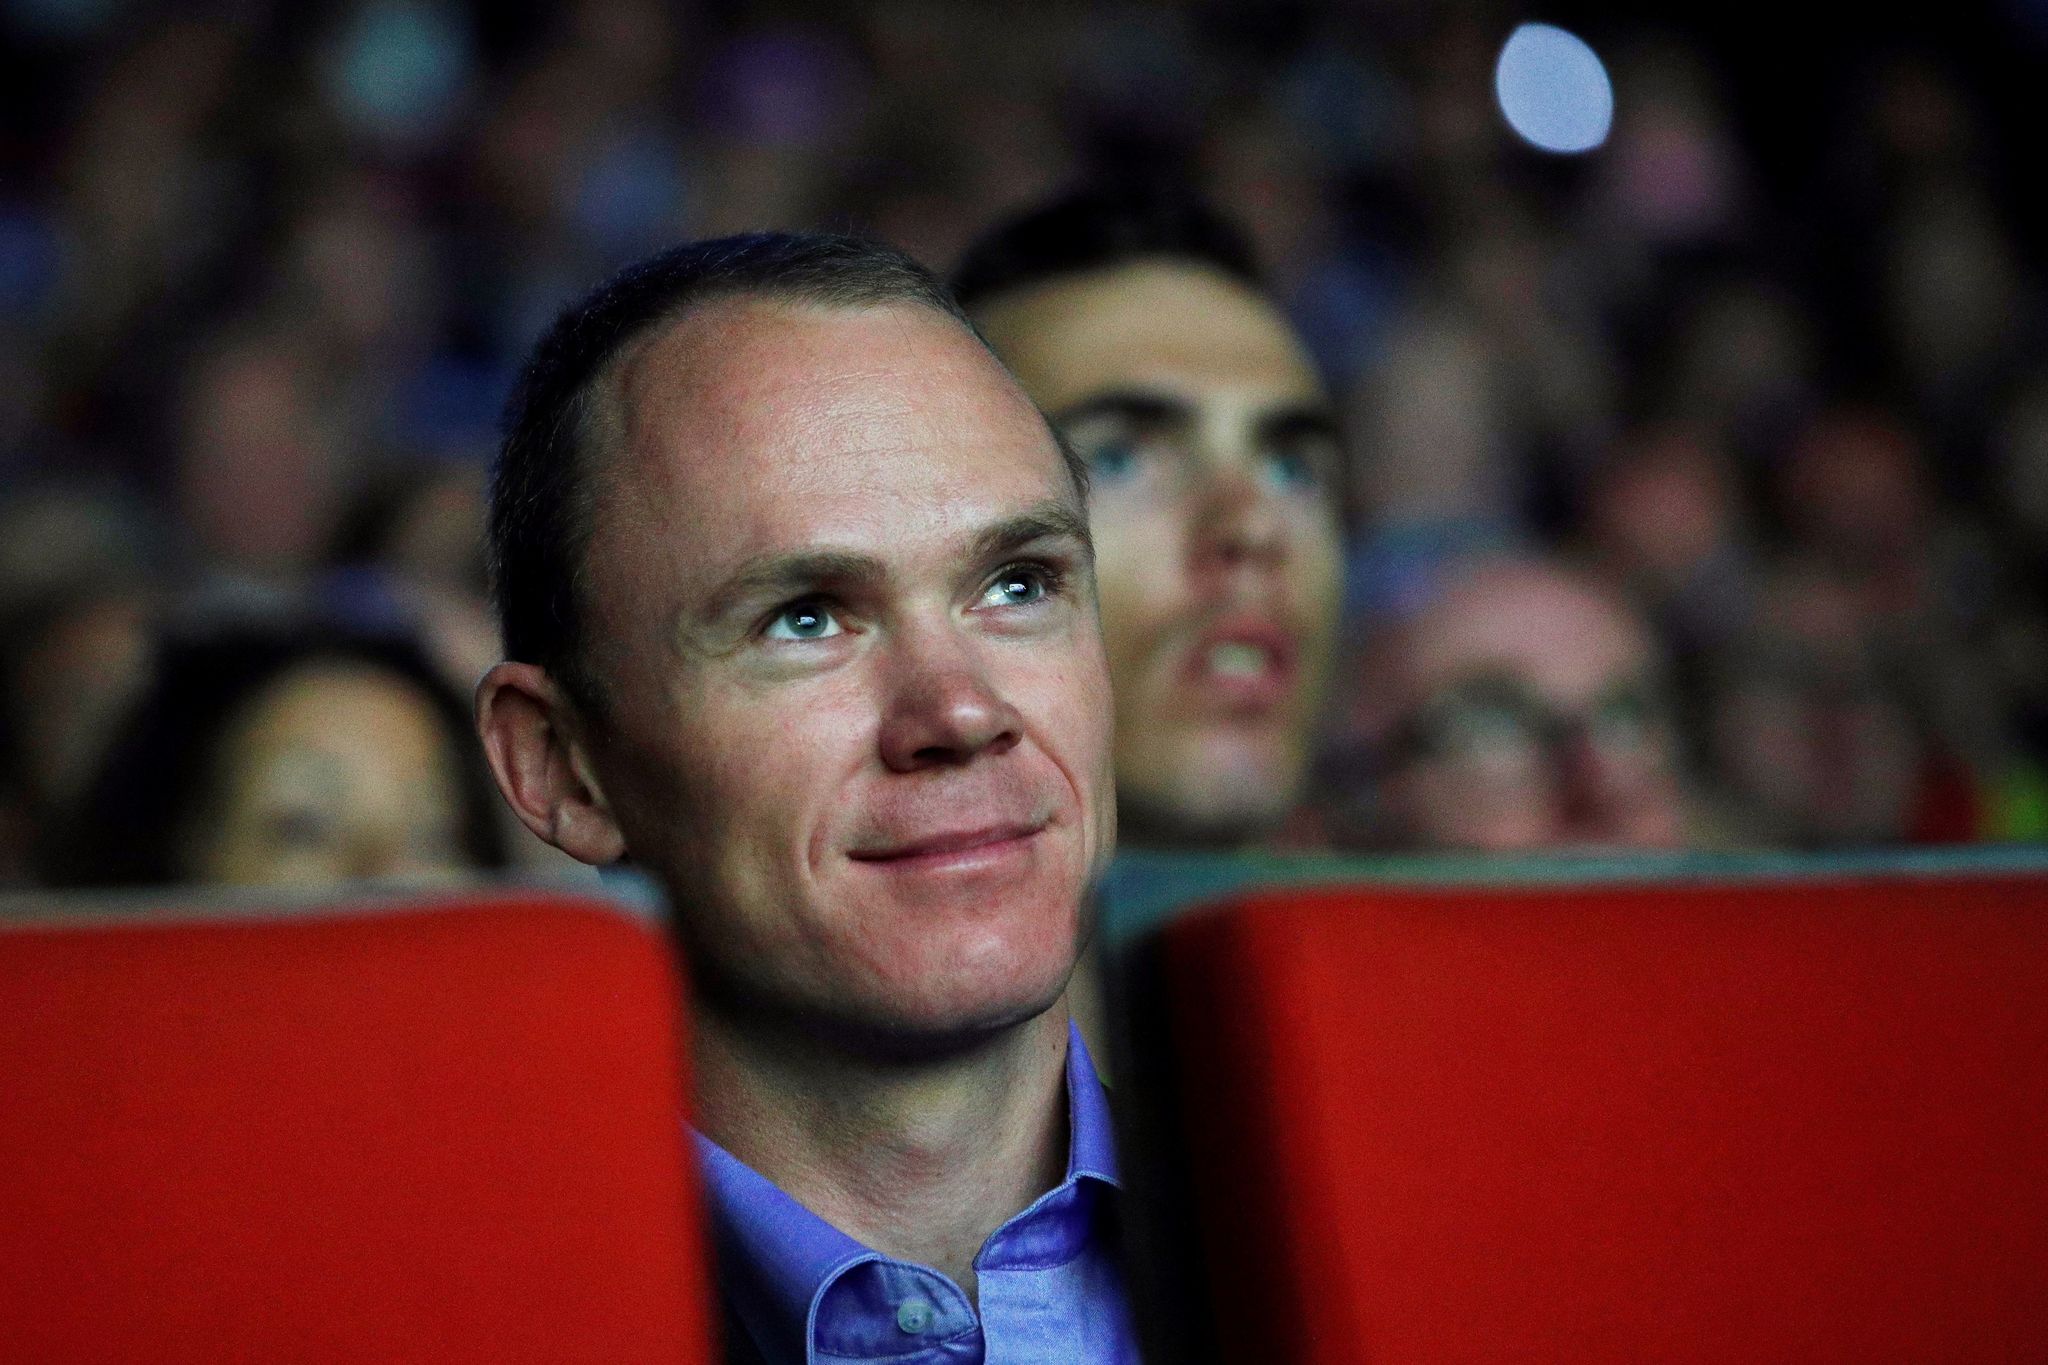 Paris (France), 15/10/2019.- British rider Christopher Froome attends the presentation of the <HIT>Tour</HIT> de France 2020 cycling race in Paris, France, 15 October 2019. The 107th edition of the <HIT>Tour</HIT> de France will start from Nice on 27 June 2020 and will arrive in Paris on 19 July 2020. (Ciclismo, <HIT>Francia</HIT>, Niza) EFE/EPA/YOAN VALAT